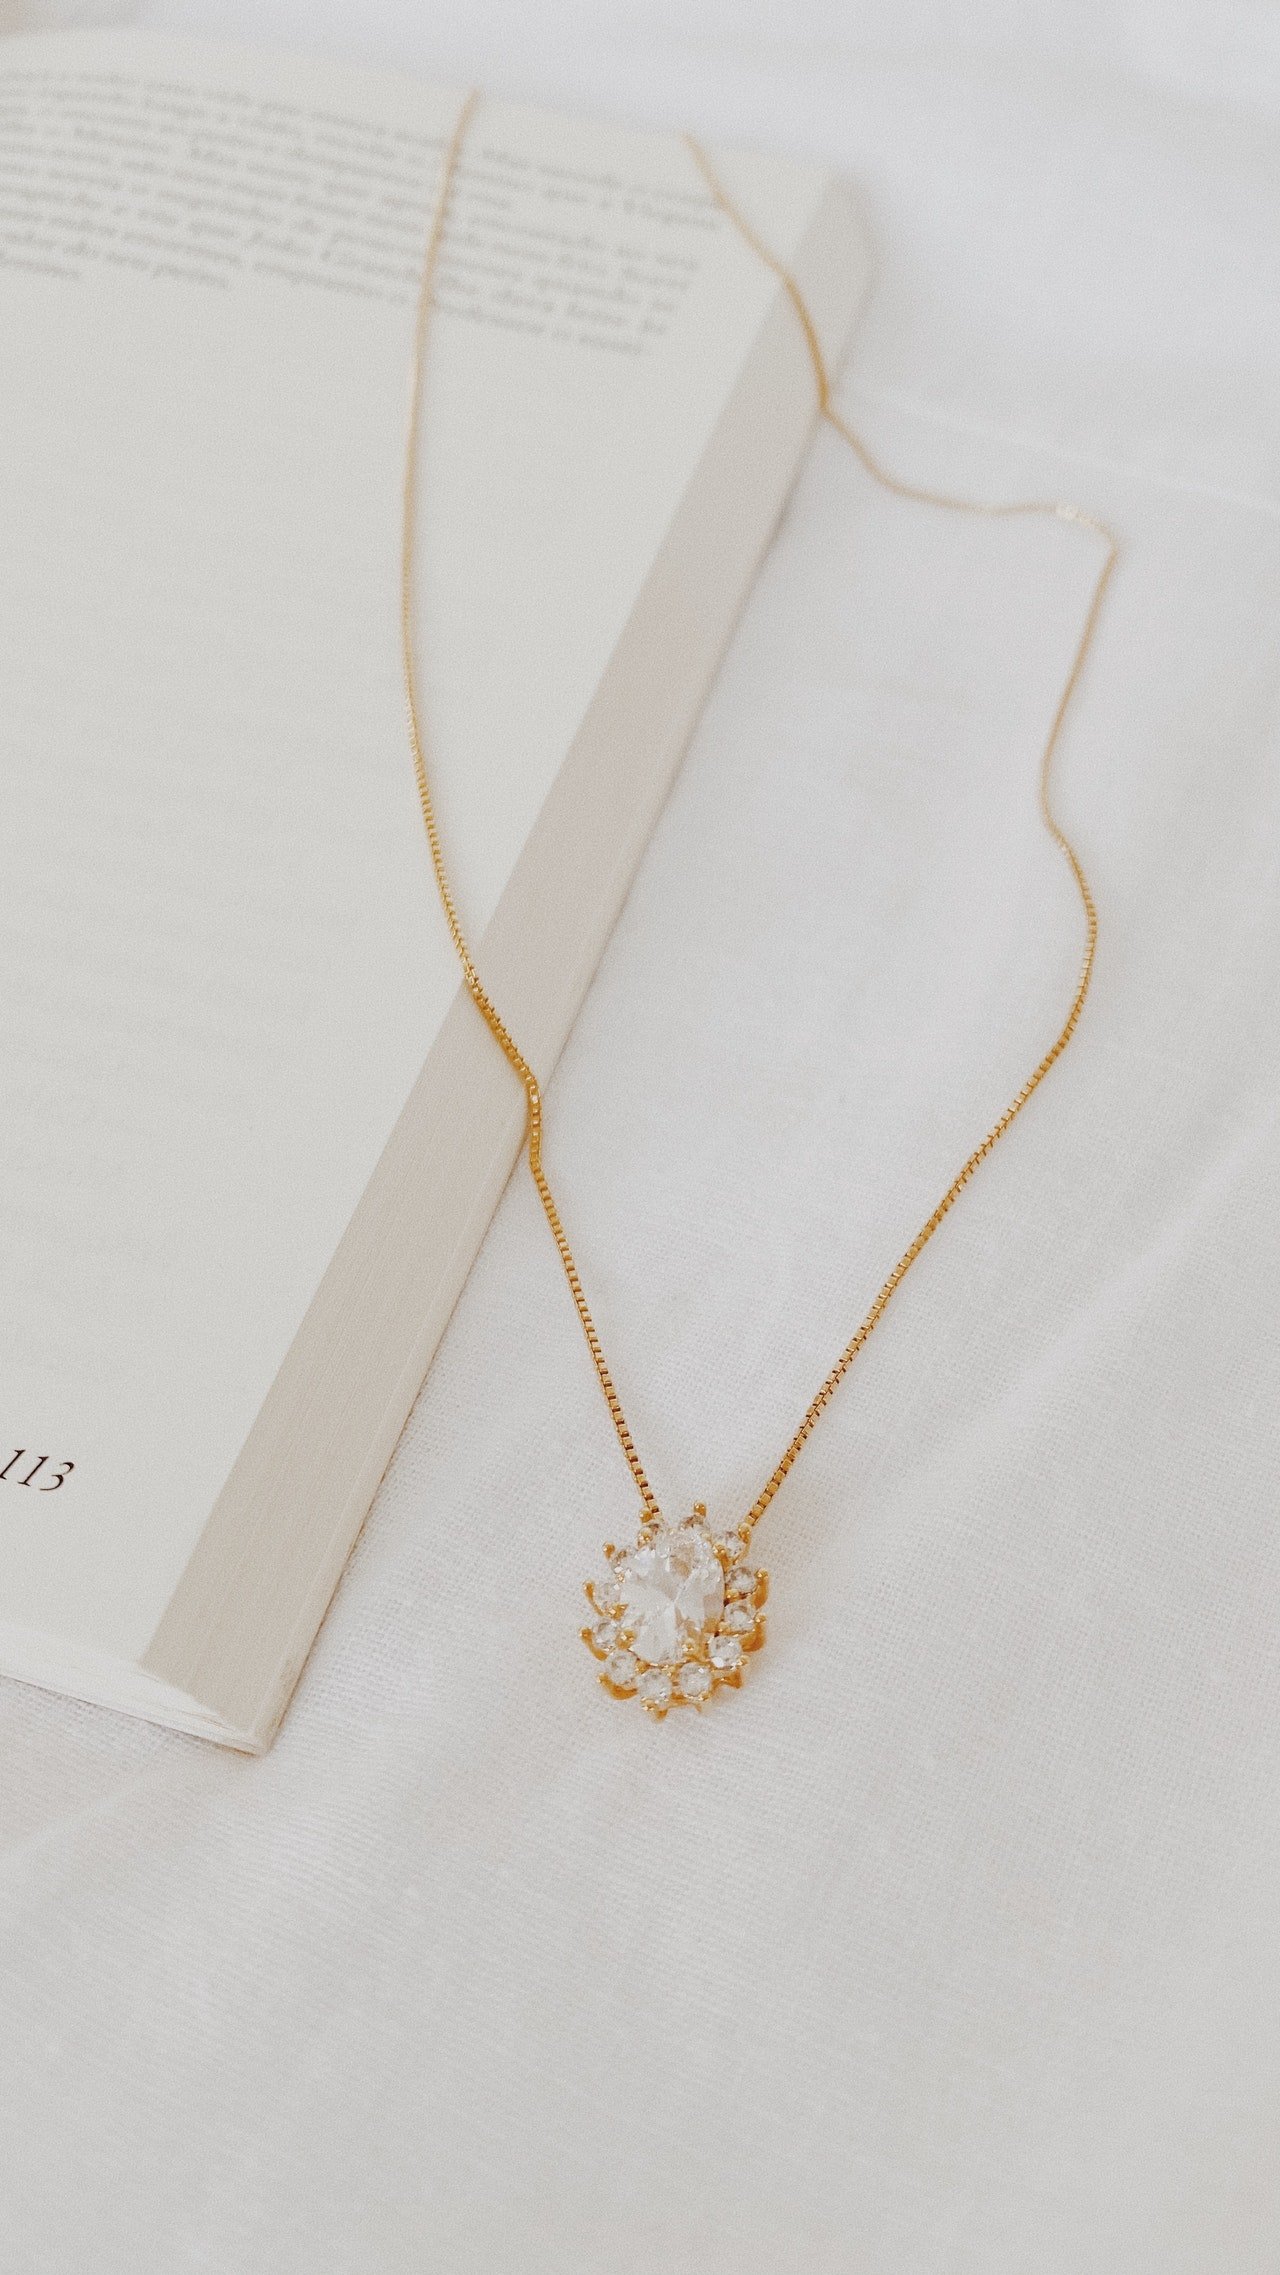 Photo of a gold necklace | Photo: Pexels